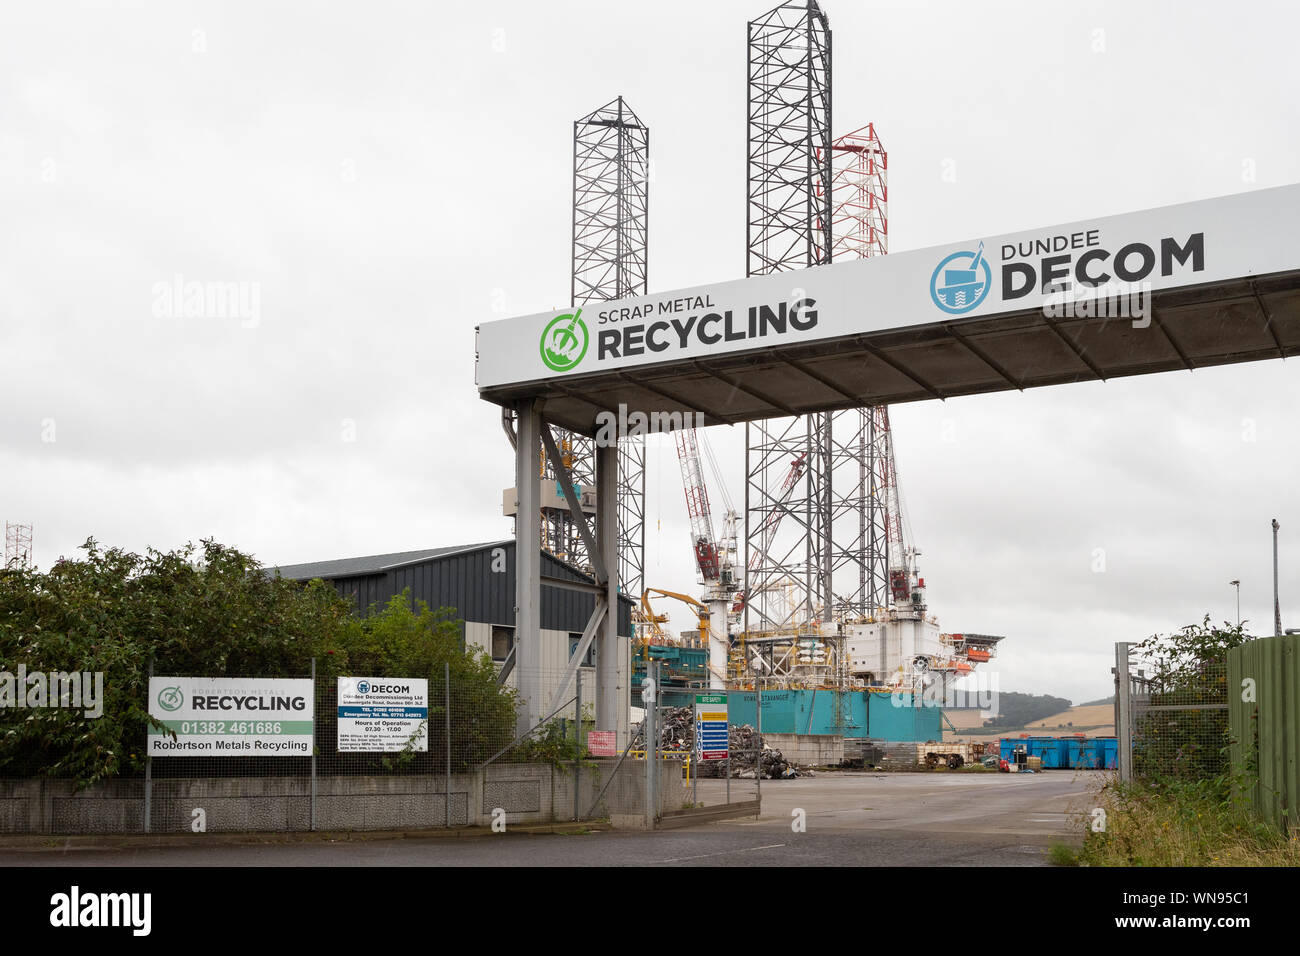 North Sea oil and gas decommissioning work at the Port of Dundee, Scotland, UK - Dundee Decom Stock Photo